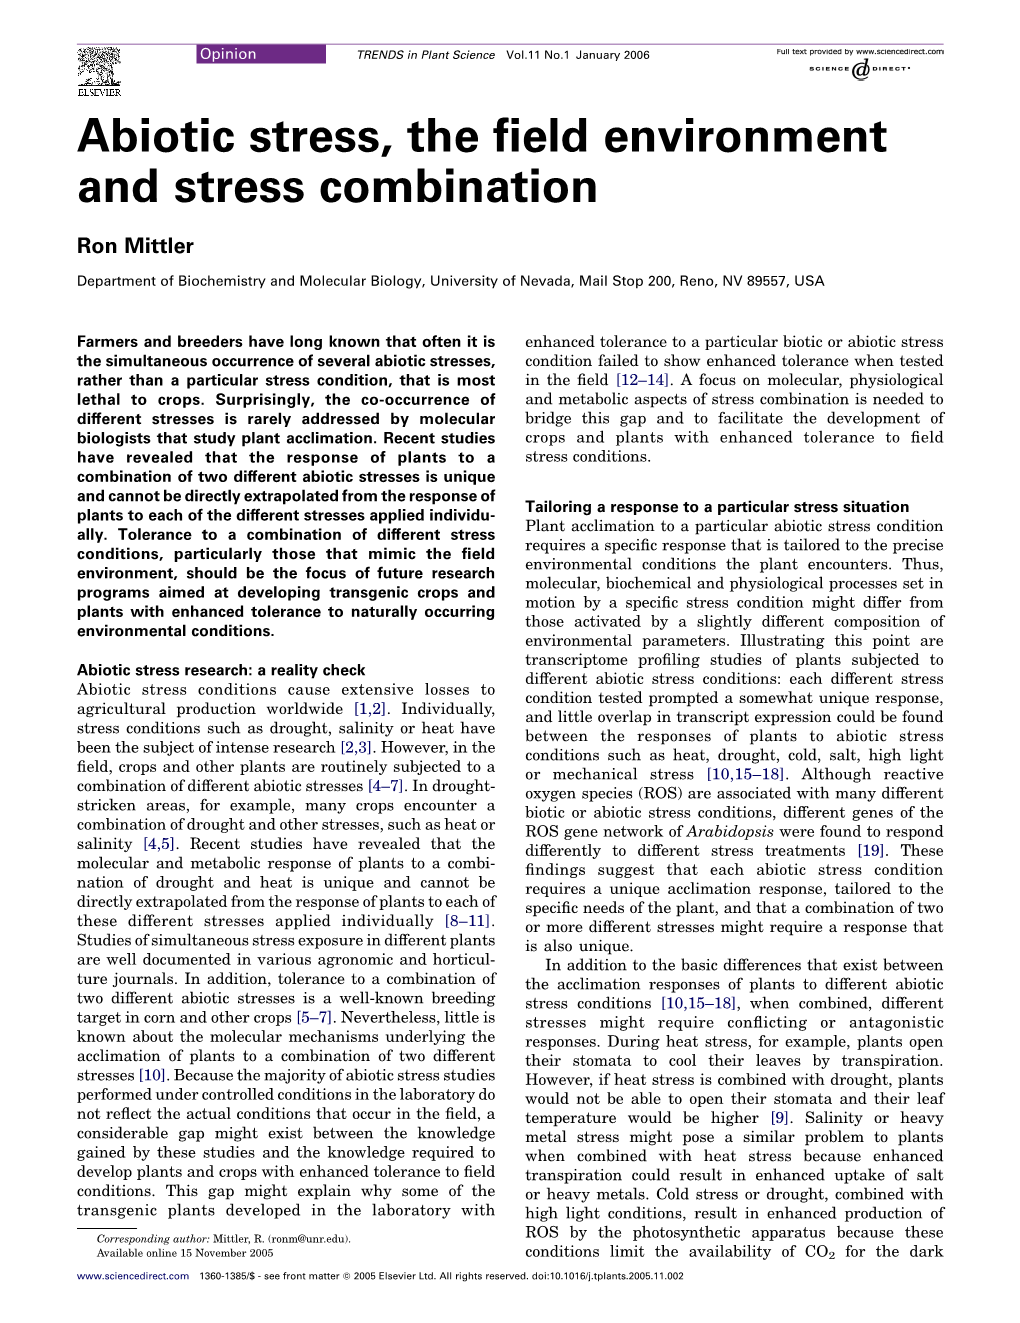 Abiotic Stress, the Field Environment and Stress Combination